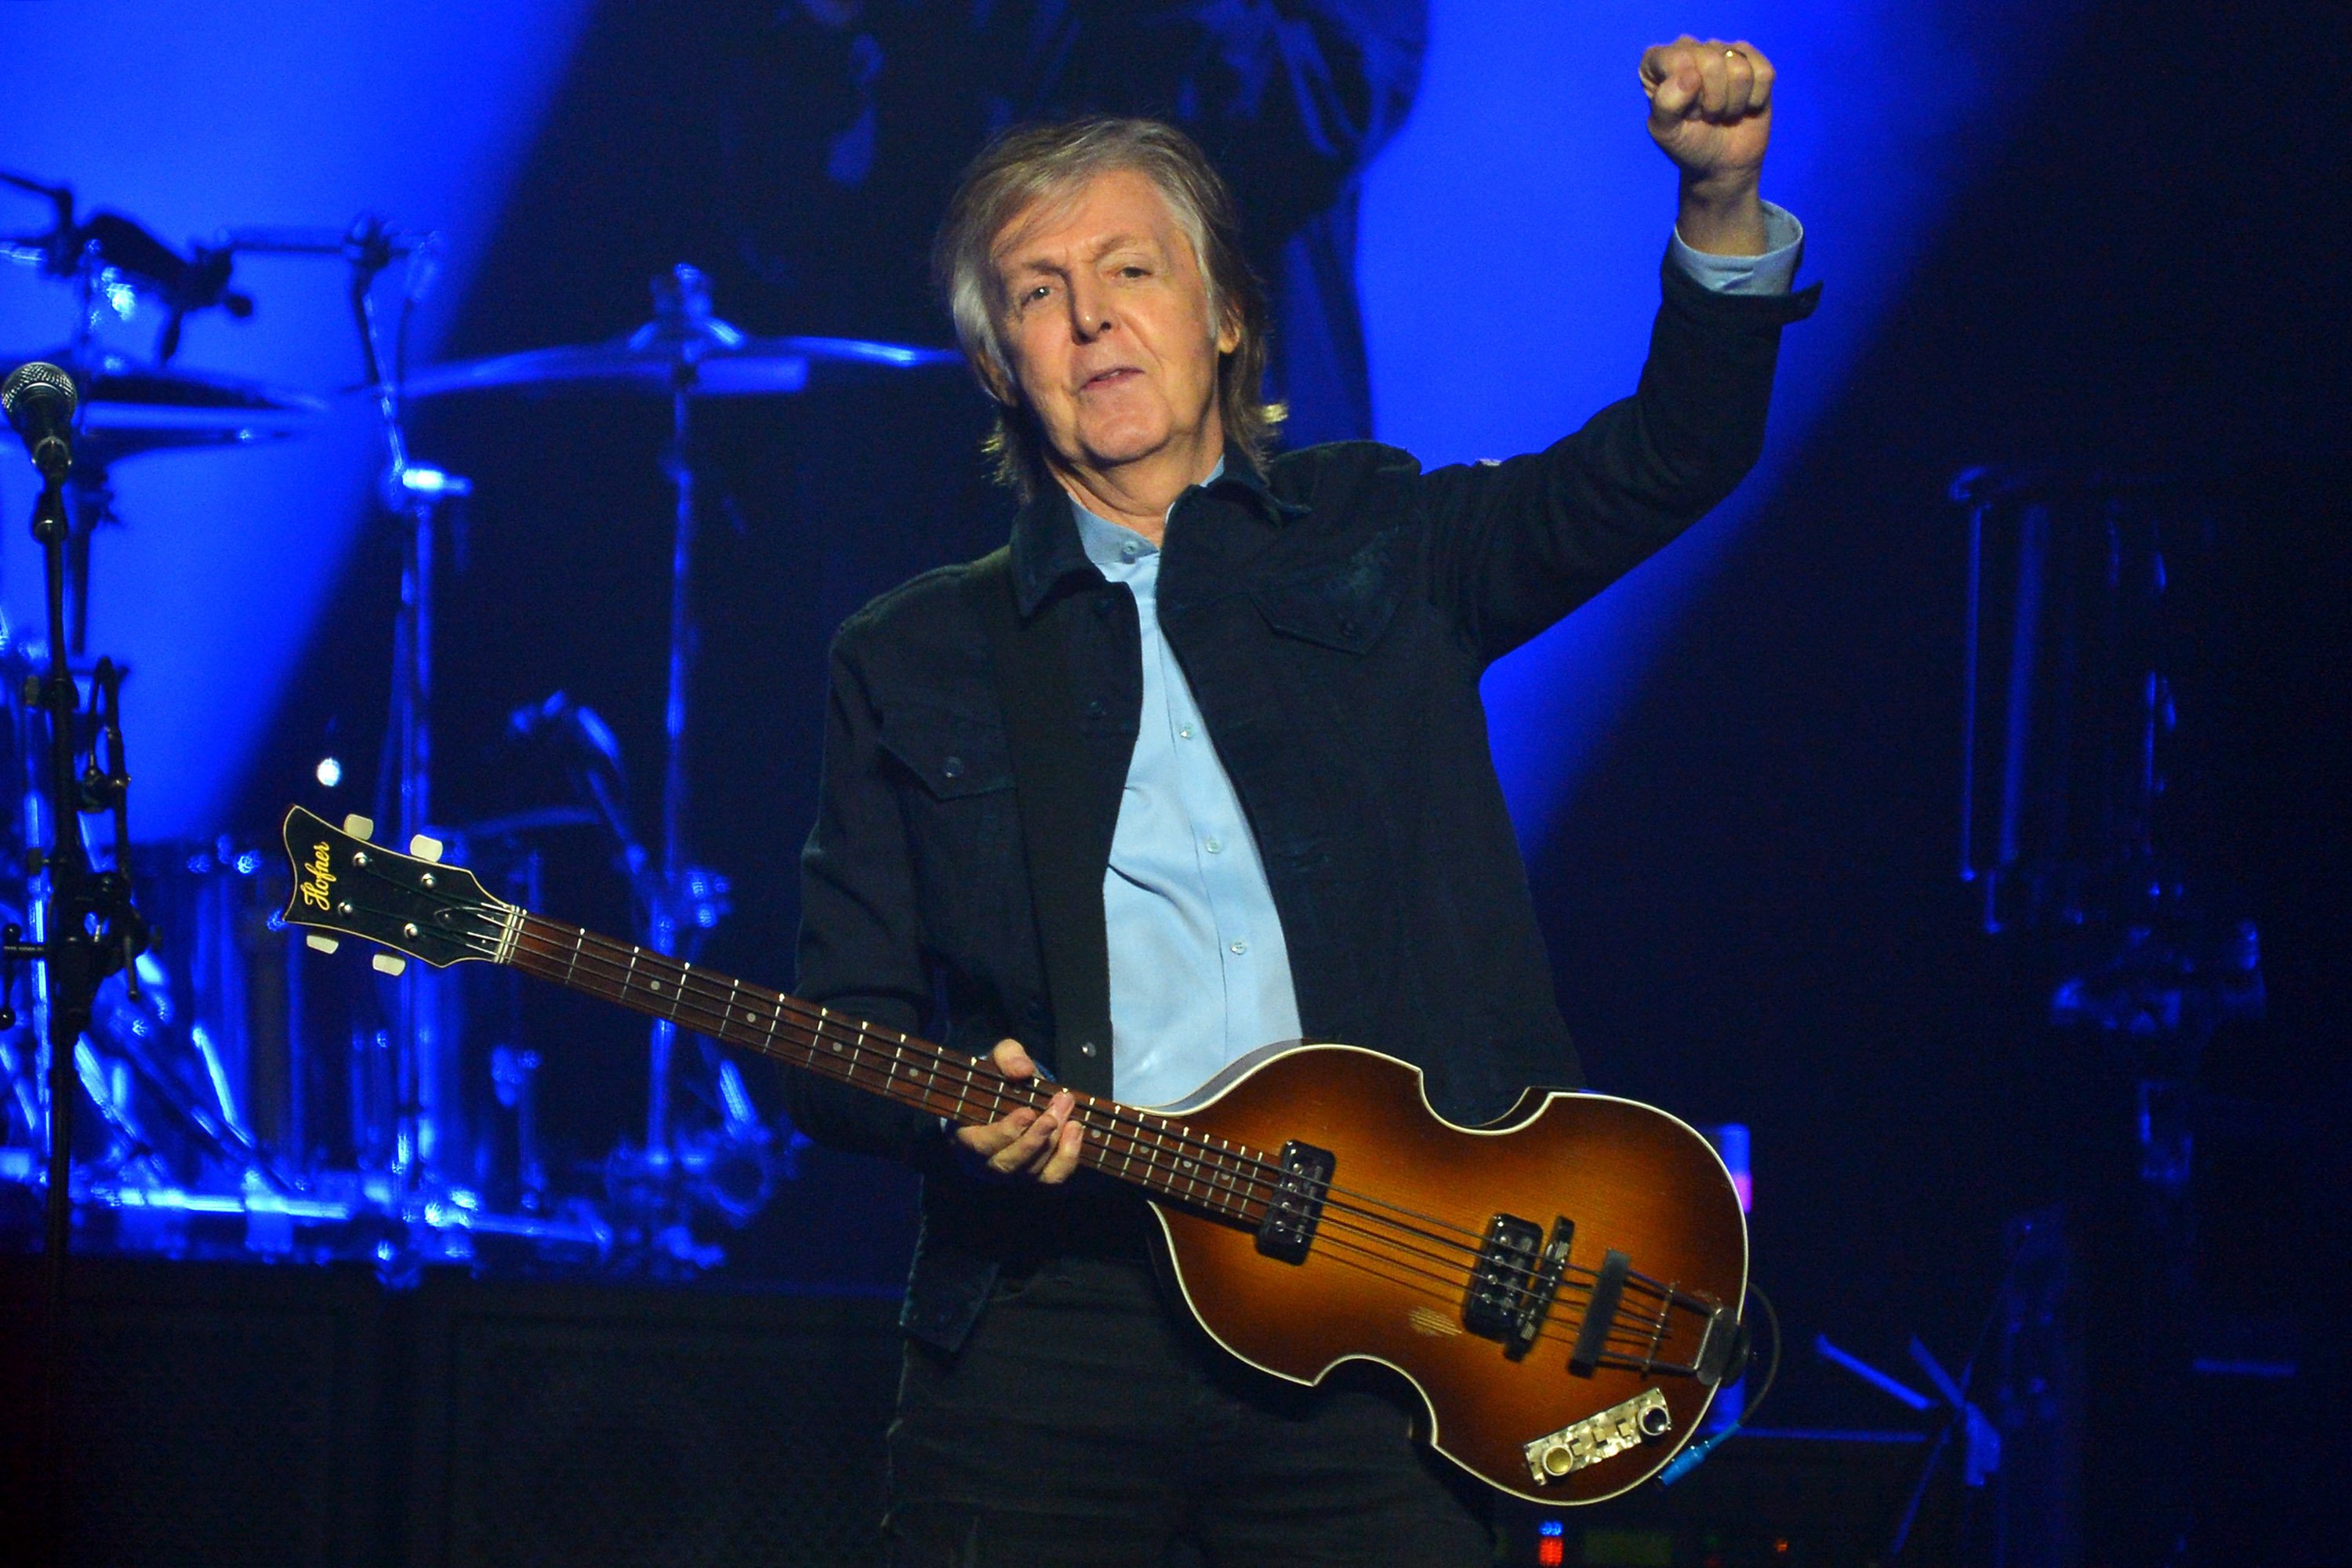 Paul McCartney performs at the O2 Arena in London, England, in 2016